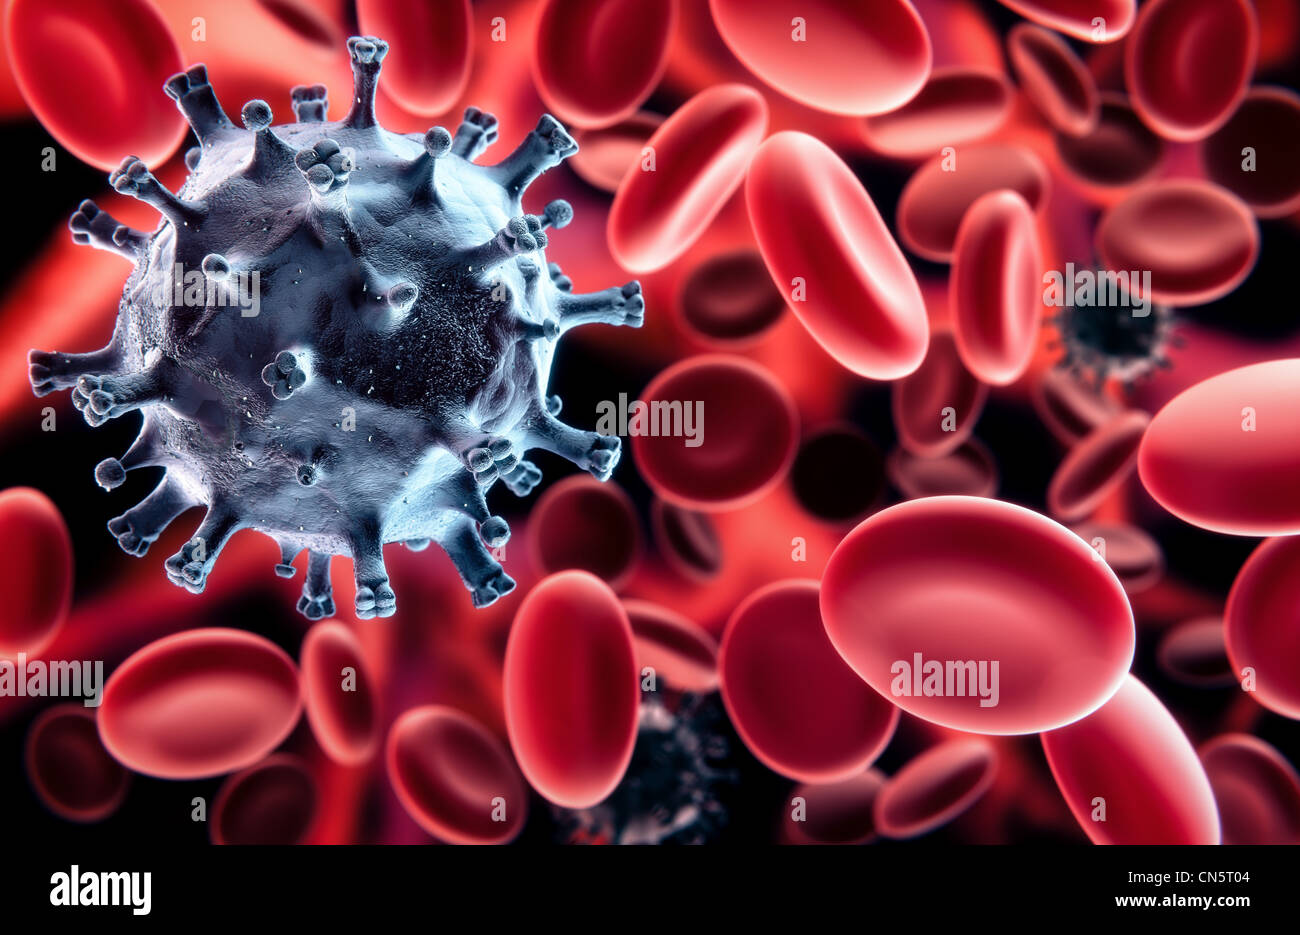 Virus in blood – among the red blood cells – Scanning Electron Microscopy stylized Stock Photo